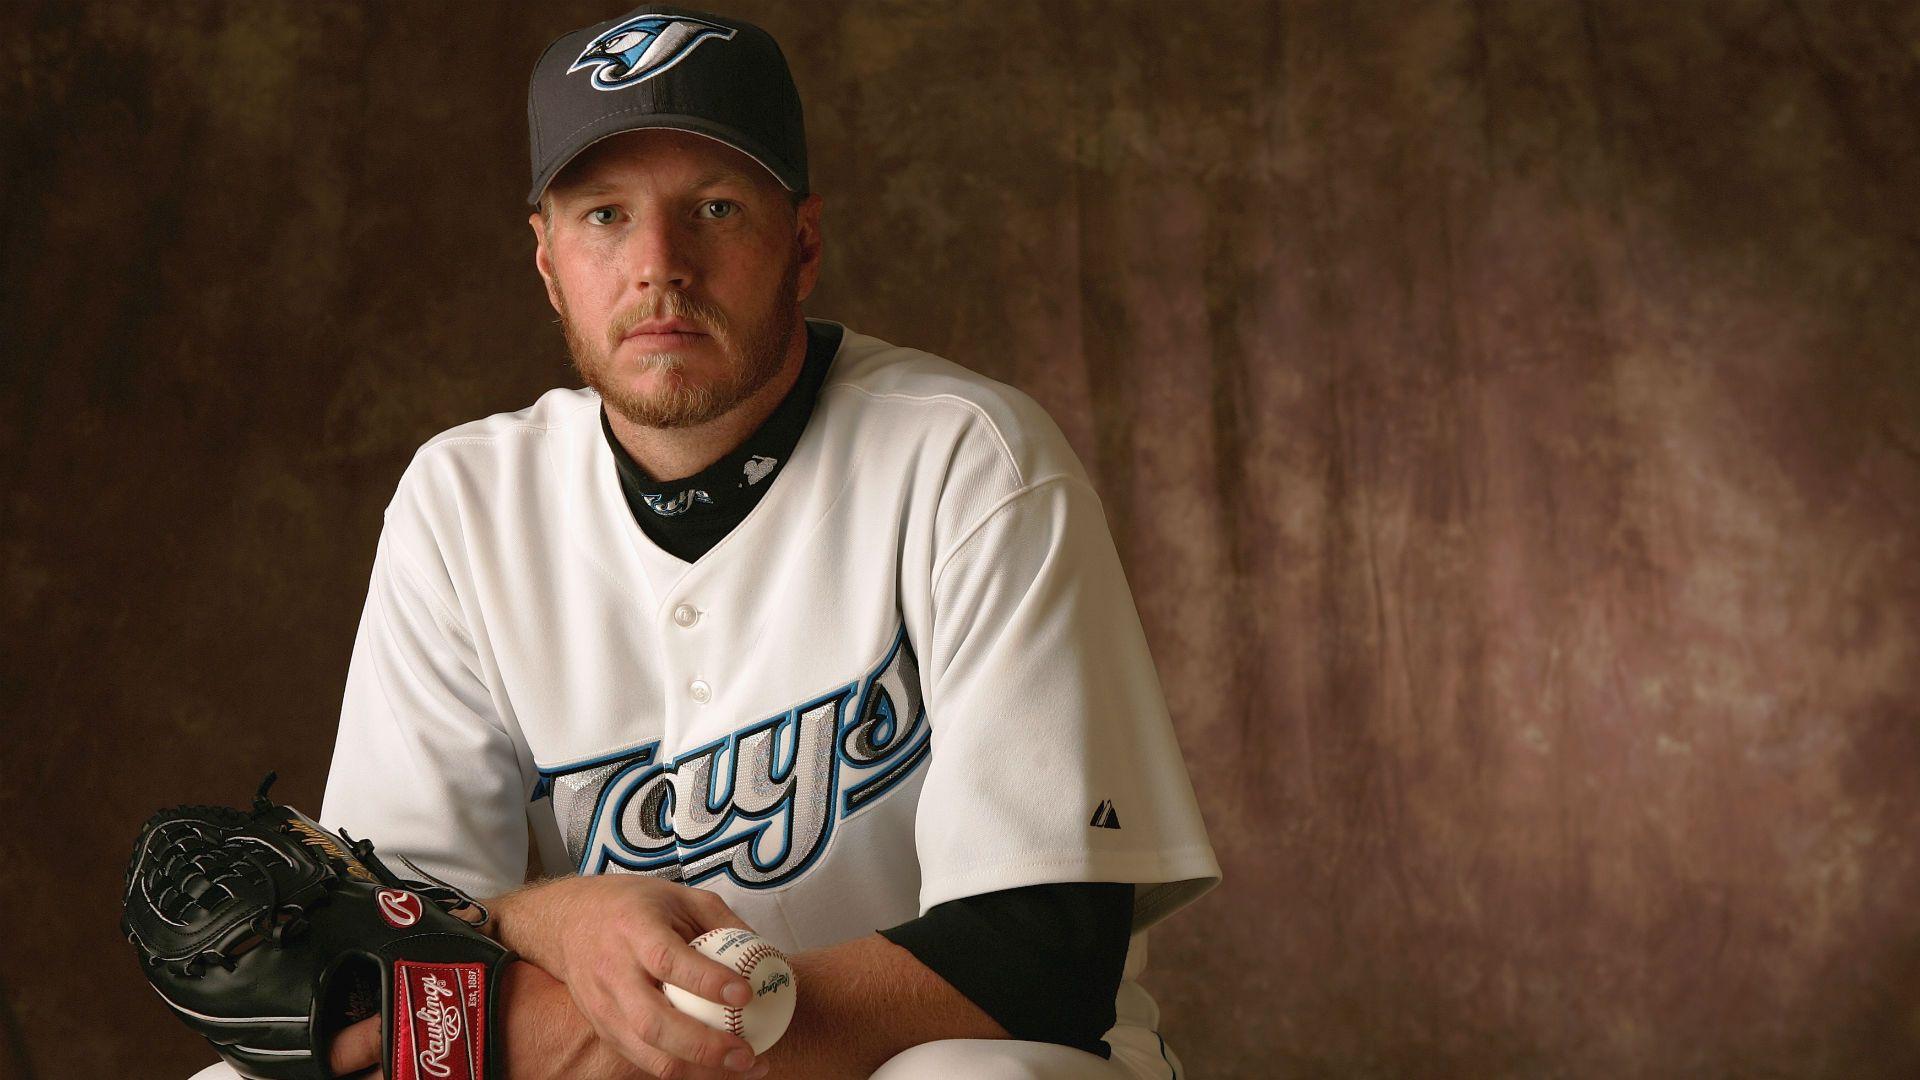 Blue Jays to honor Roy Halladay with opening day pregame ceremony